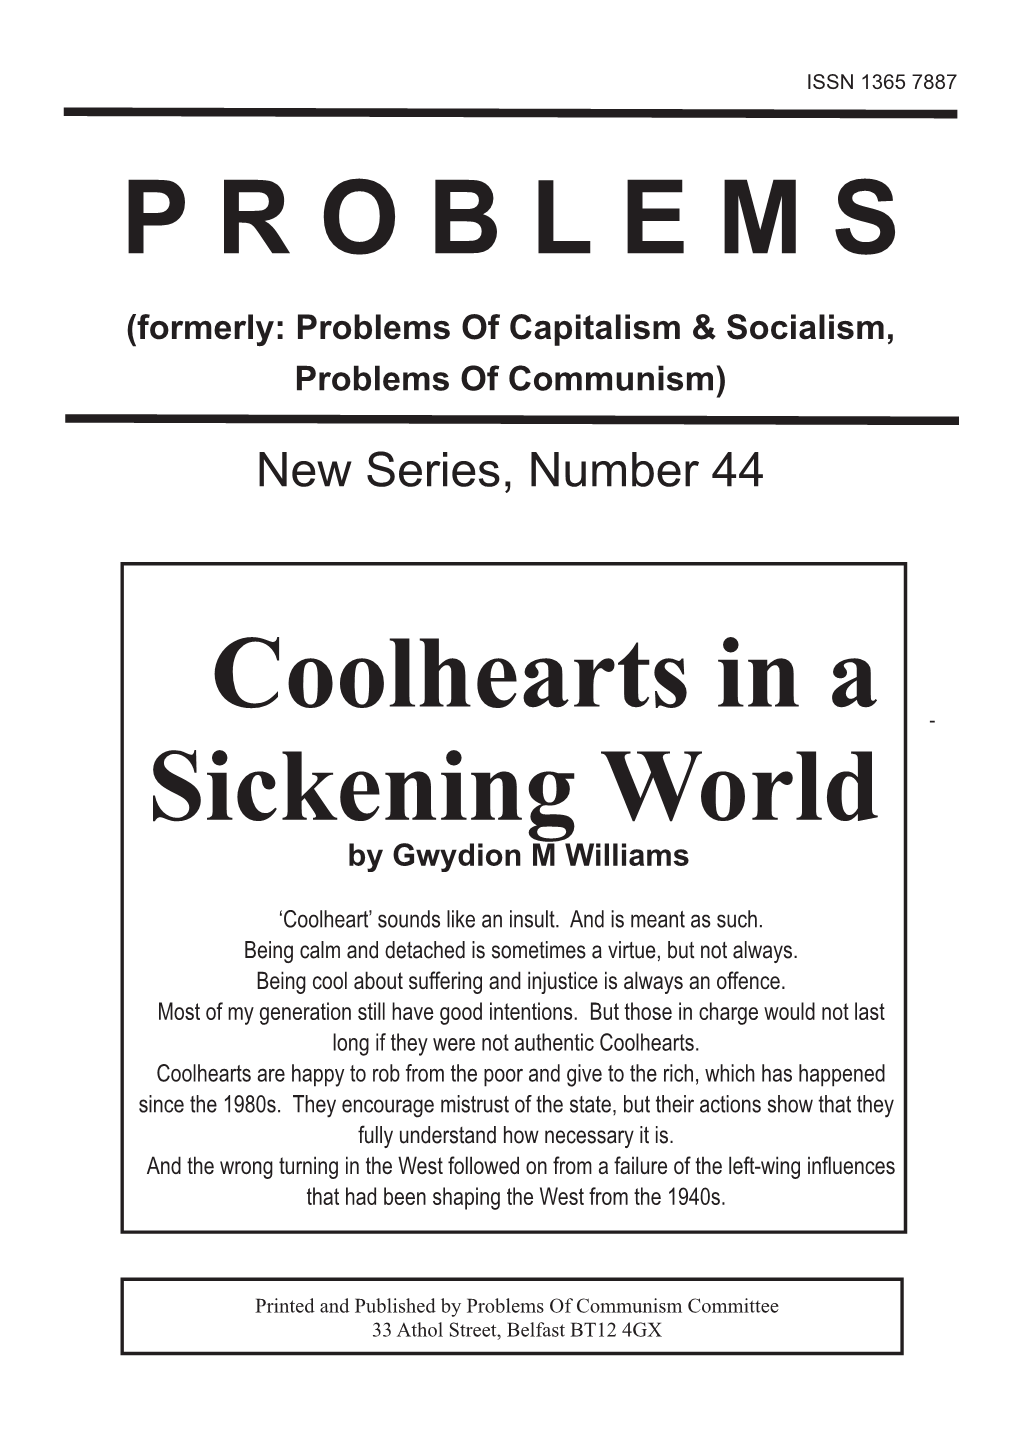 P R O B L E M S Coolhearts in a Sickening World